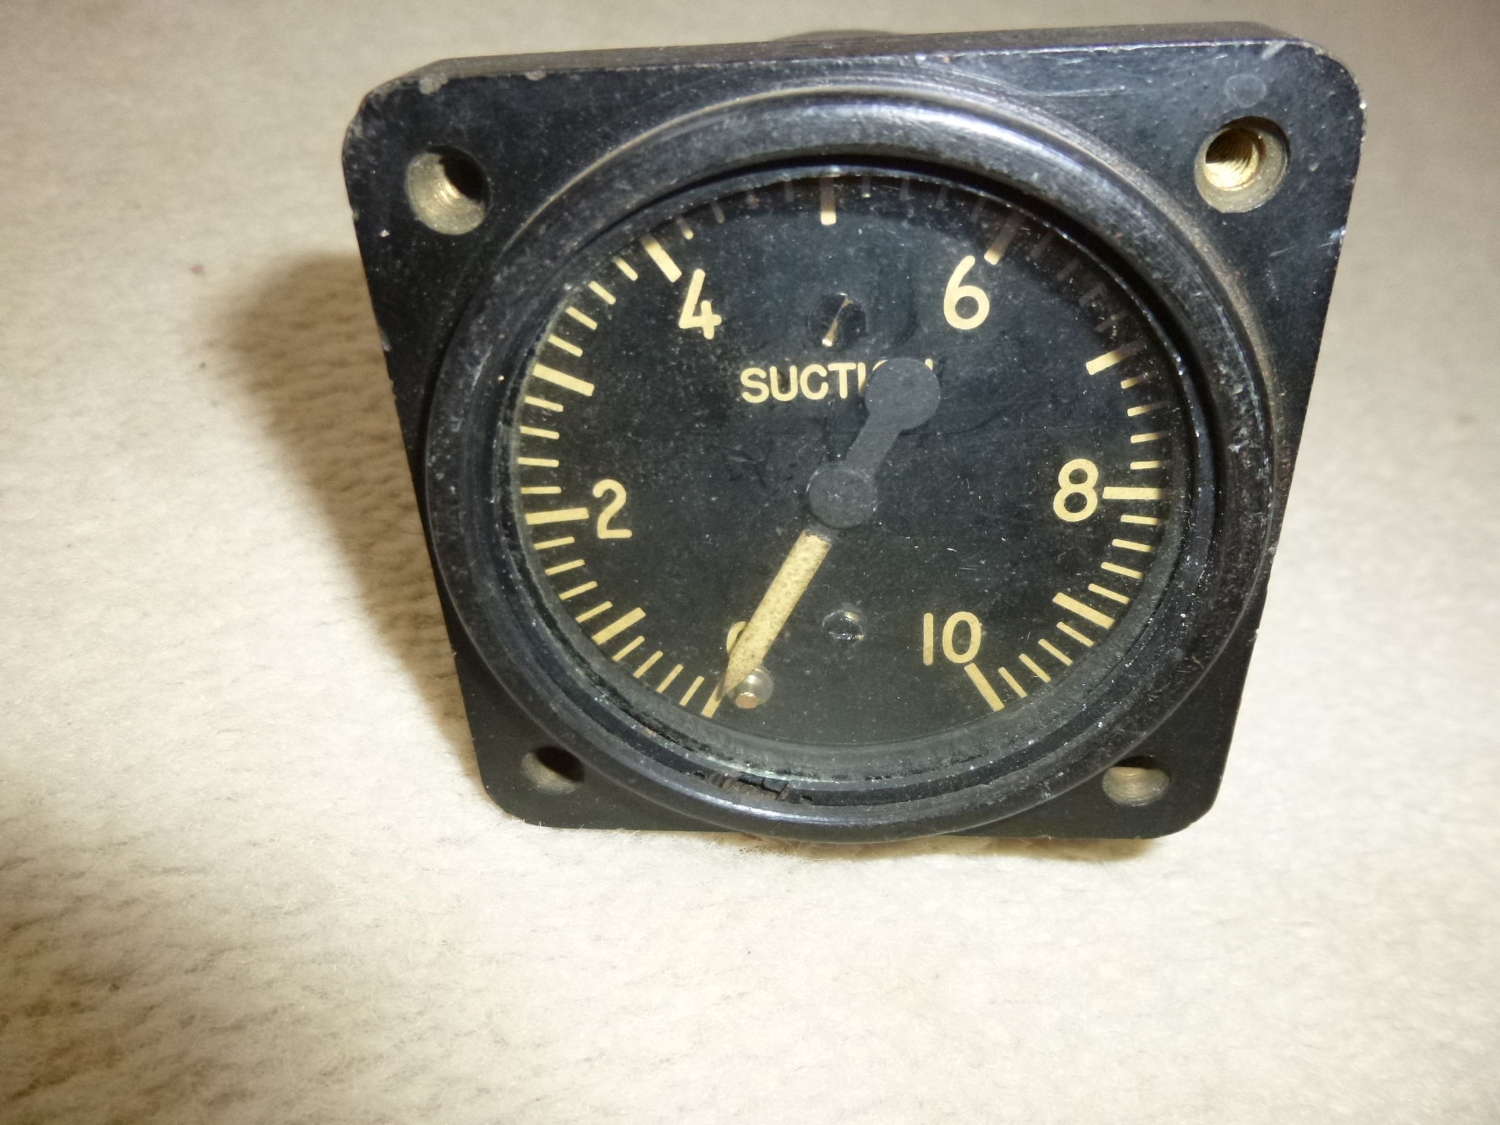 US Air Force suction pressure instrument